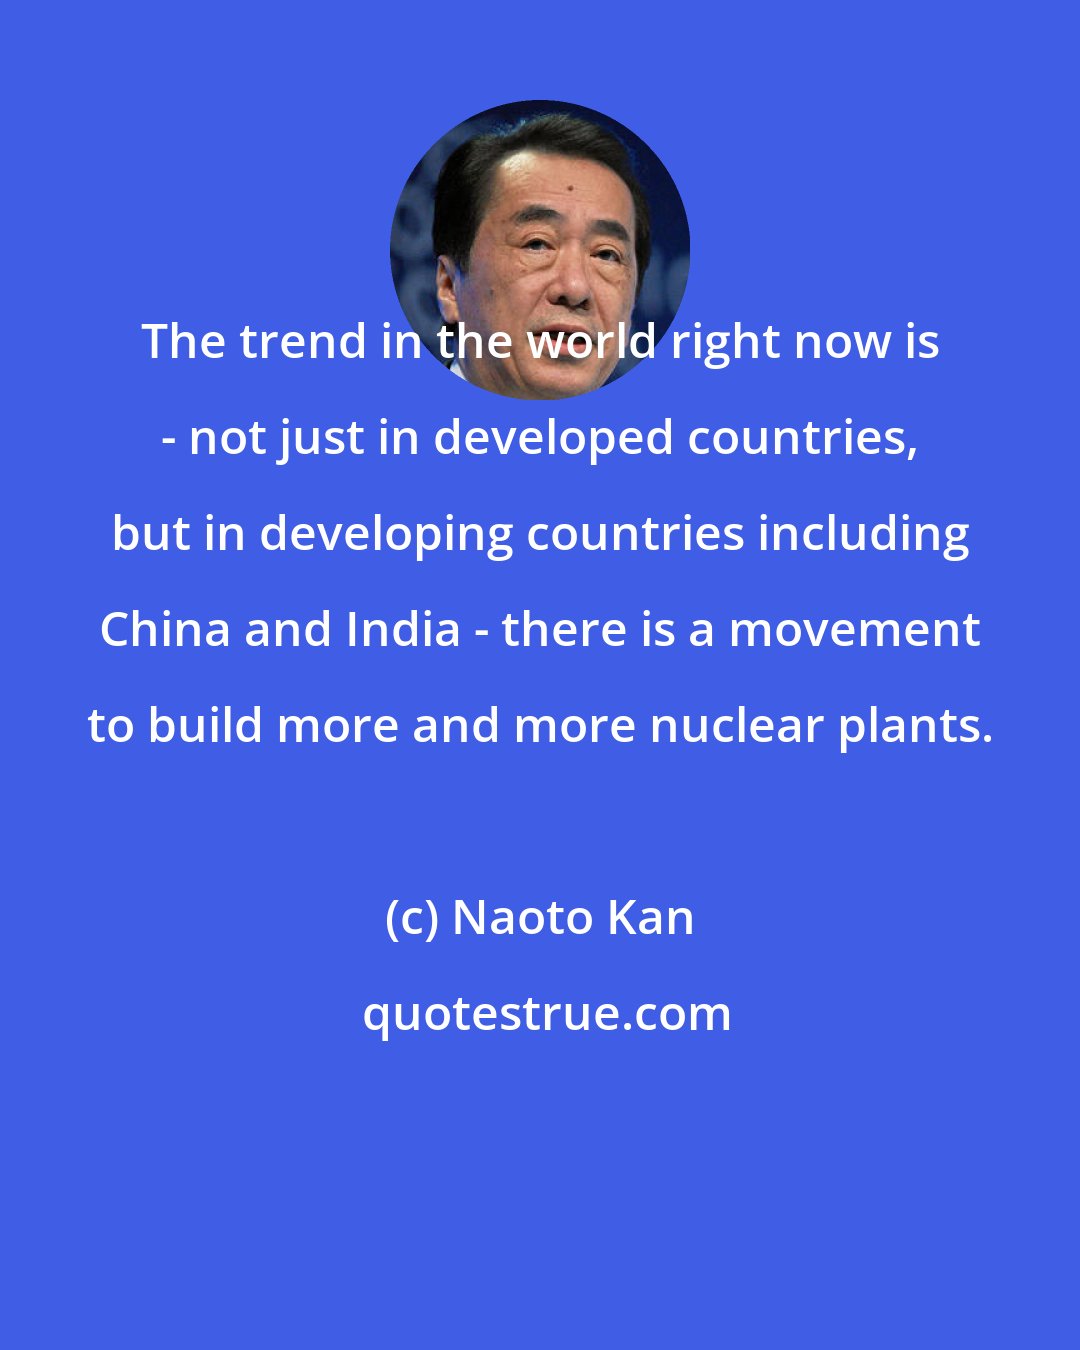 Naoto Kan: The trend in the world right now is - not just in developed countries, but in developing countries including China and India - there is a movement to build more and more nuclear plants.